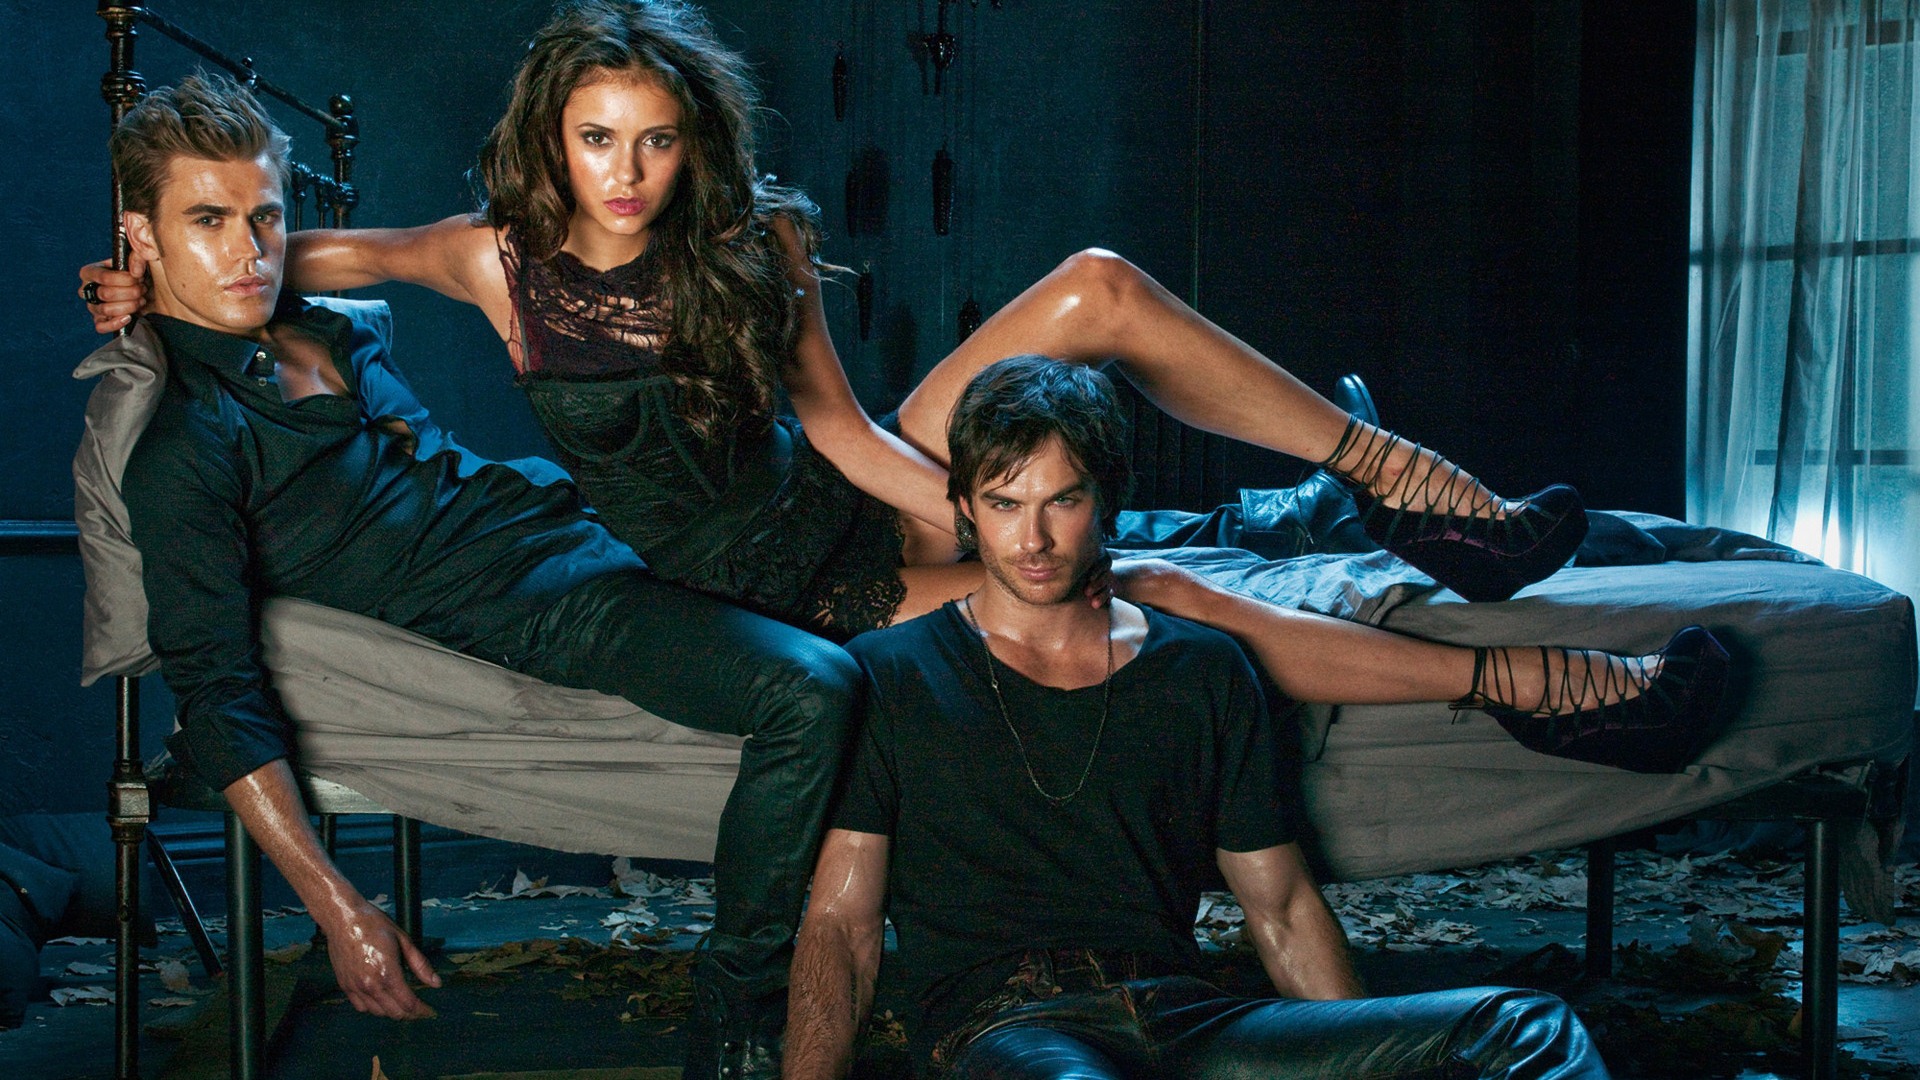 The Vampire Diaries HD Wallpapers #20 - 1920x1080